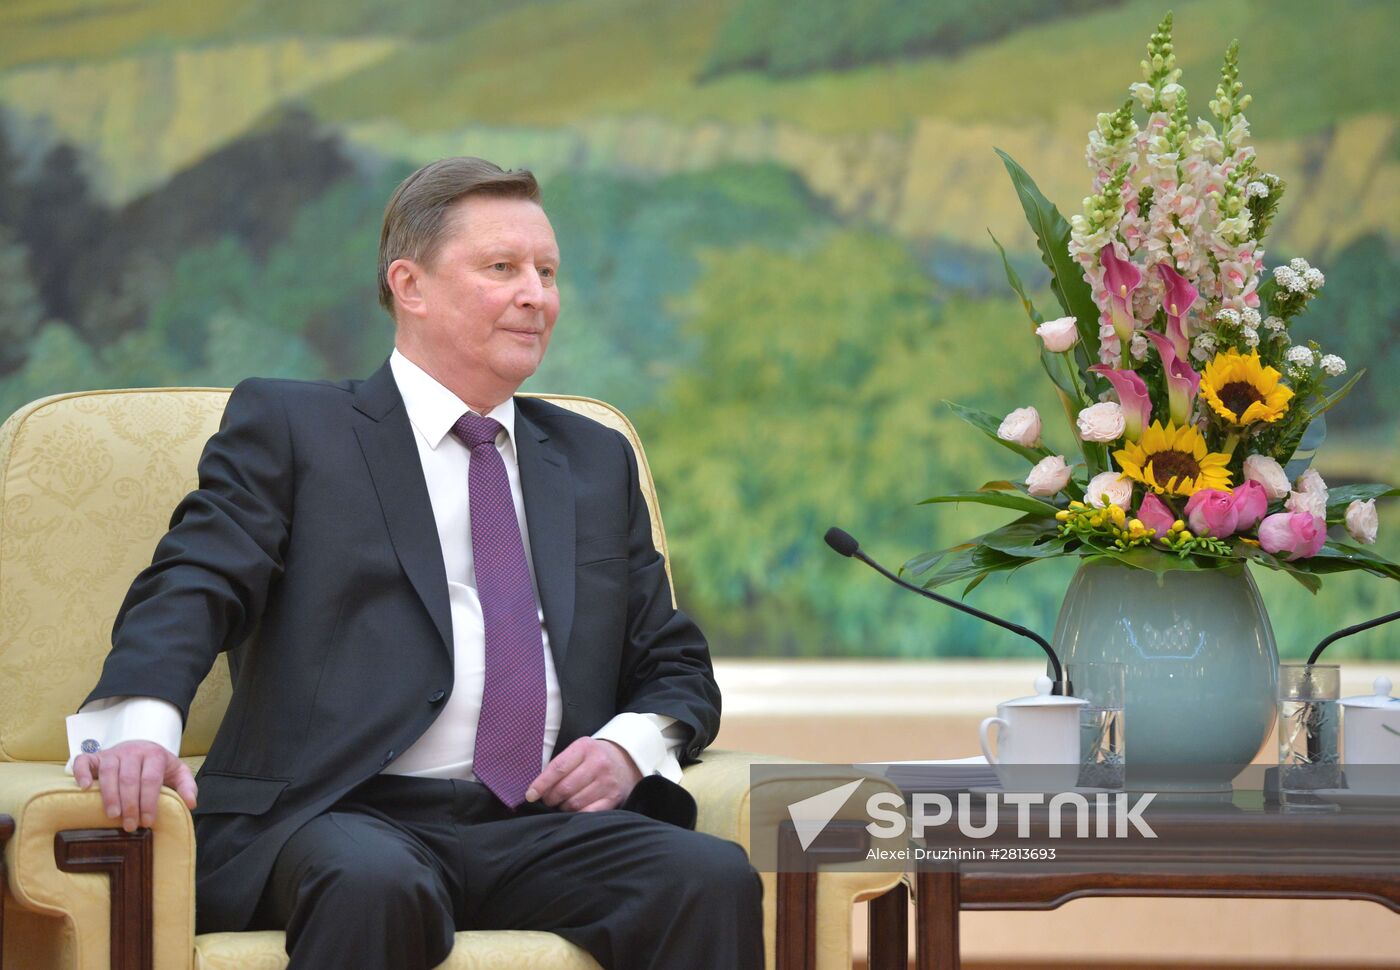 Chief of Staff of the Presidential Executive Office Sergei Ivanov's visit to China. Day two